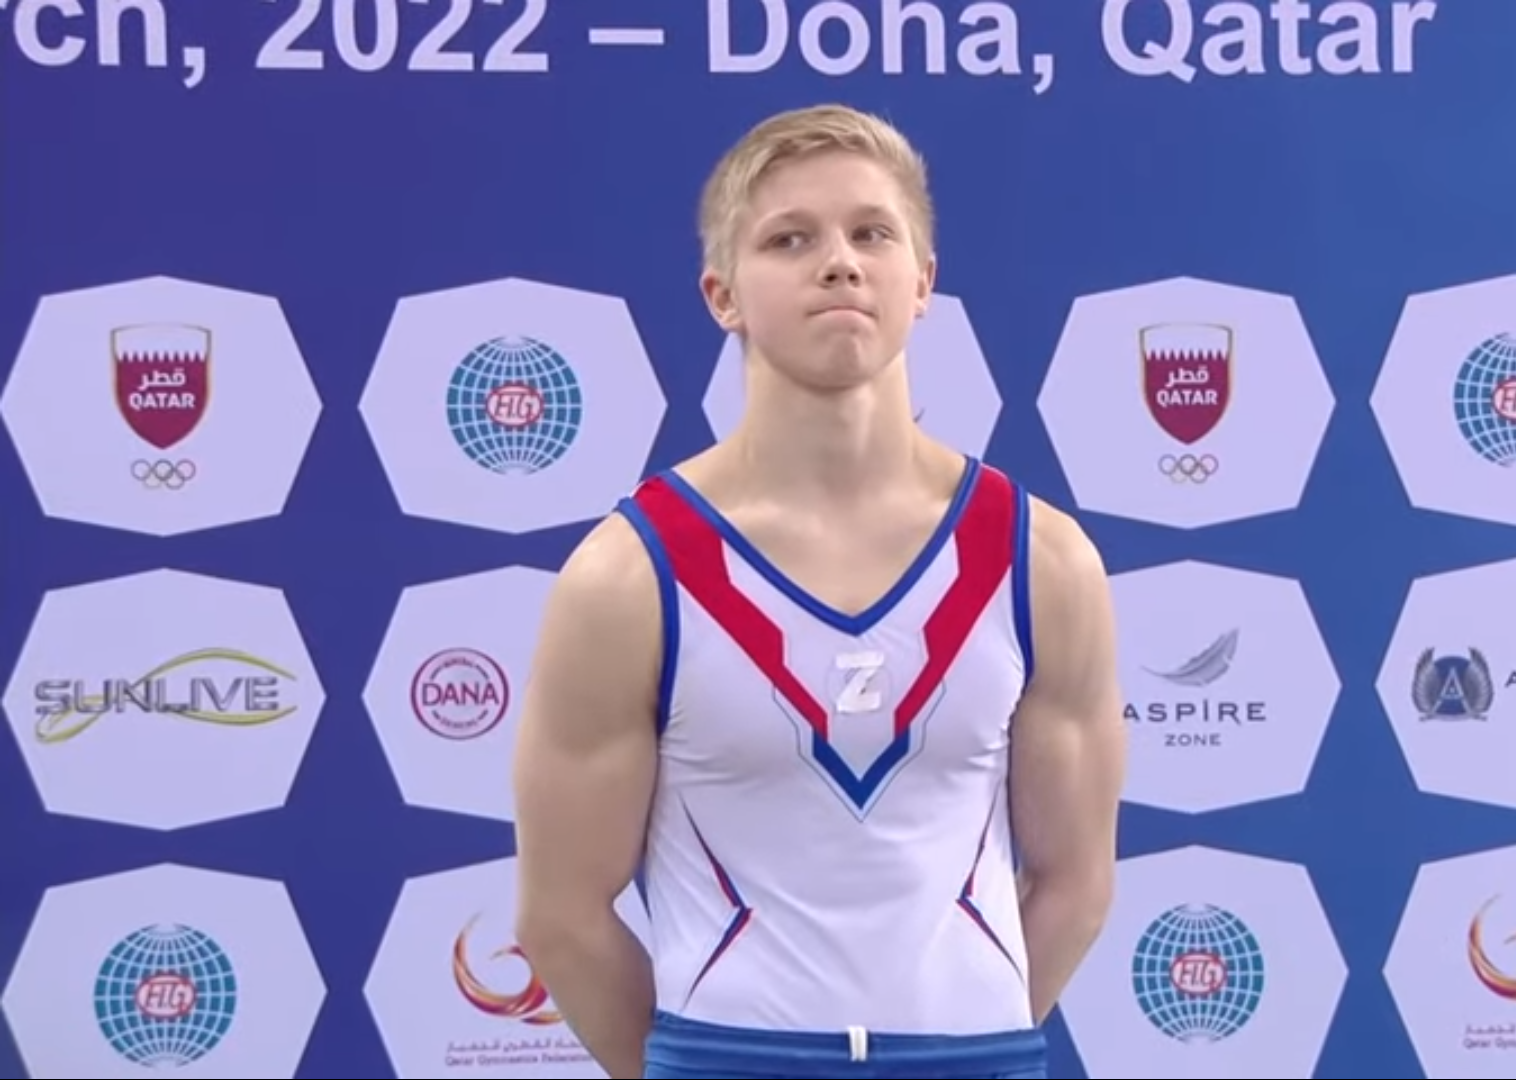 Ivan Kuliak wore the Z symbol during the Apparatus World Cup in Doha ©YouTube